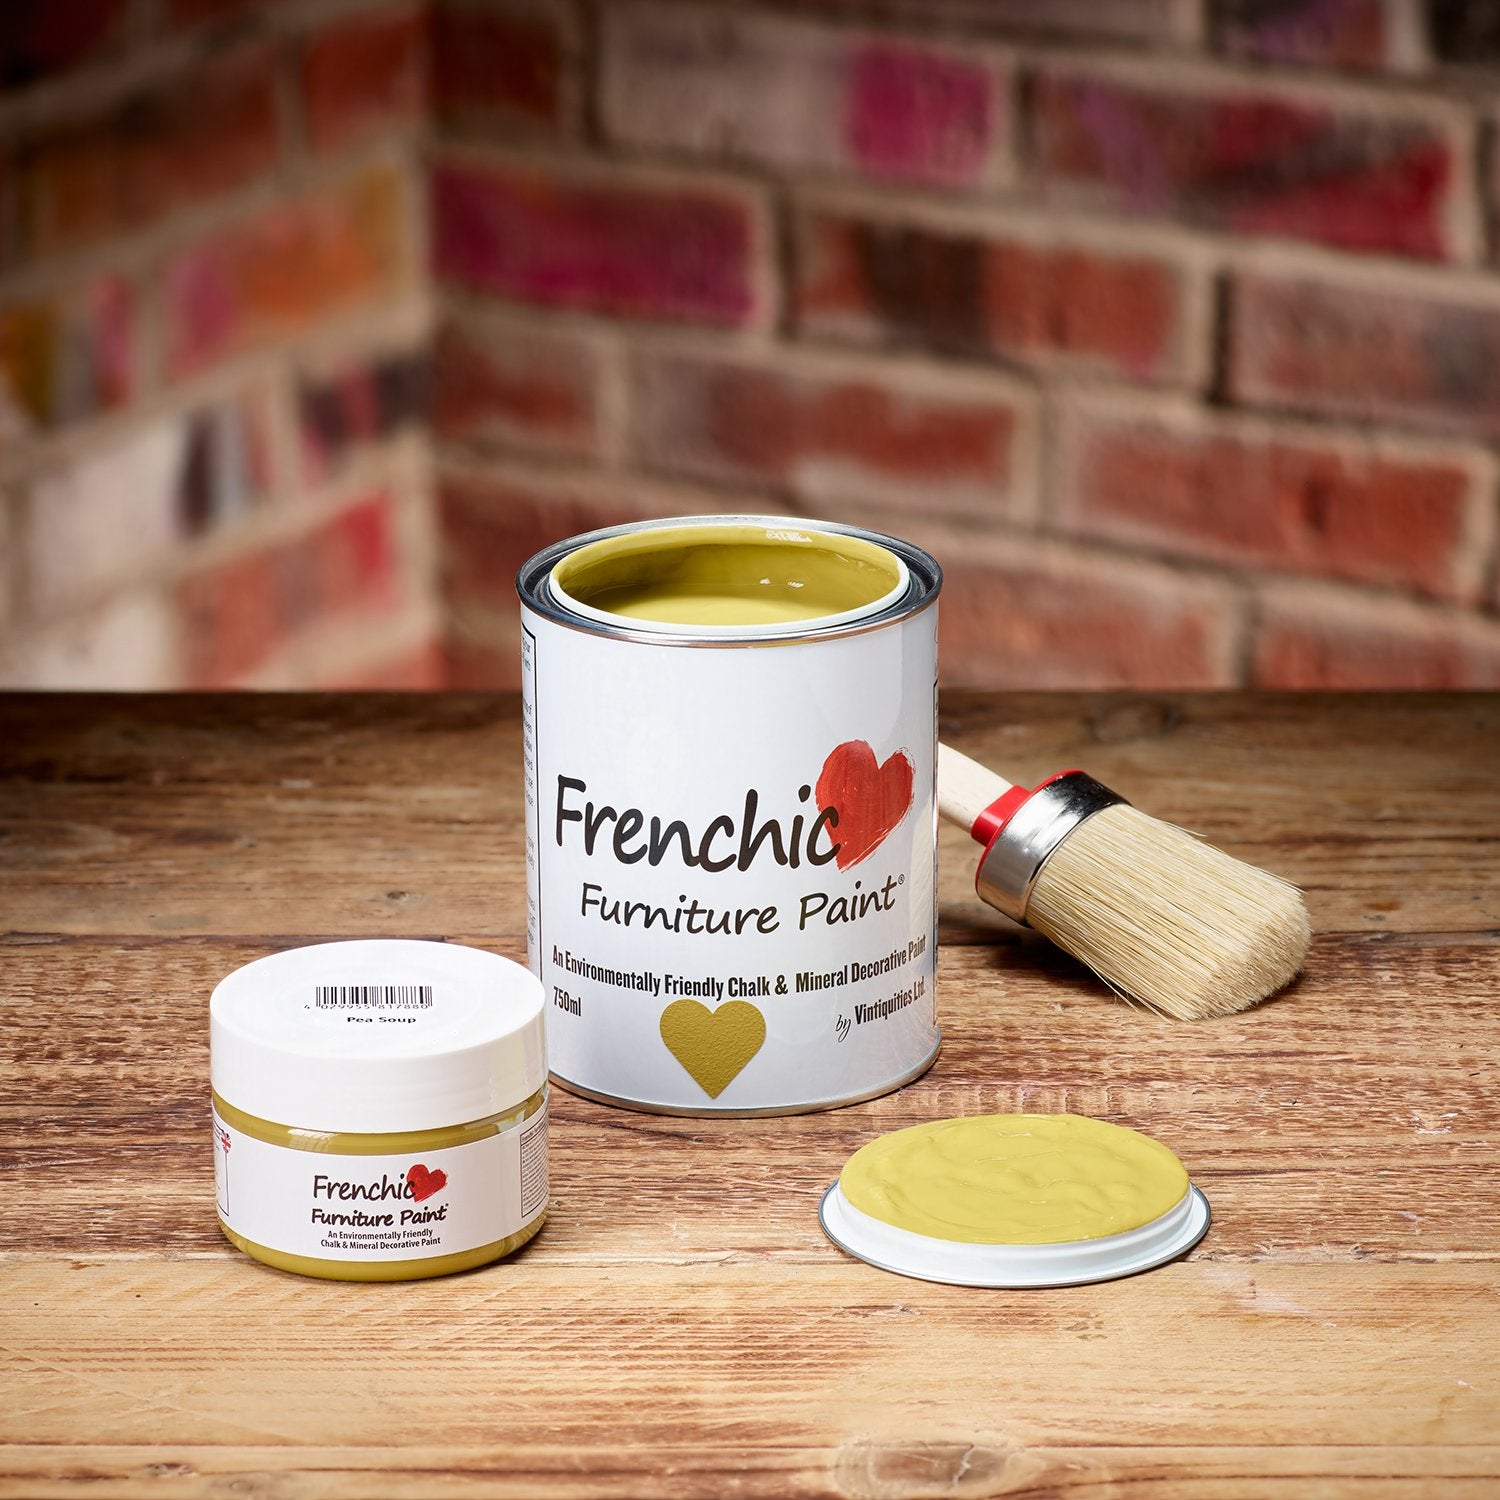 Frenchic Paint | Pea Soup Original Range by Weirs of Baggot St